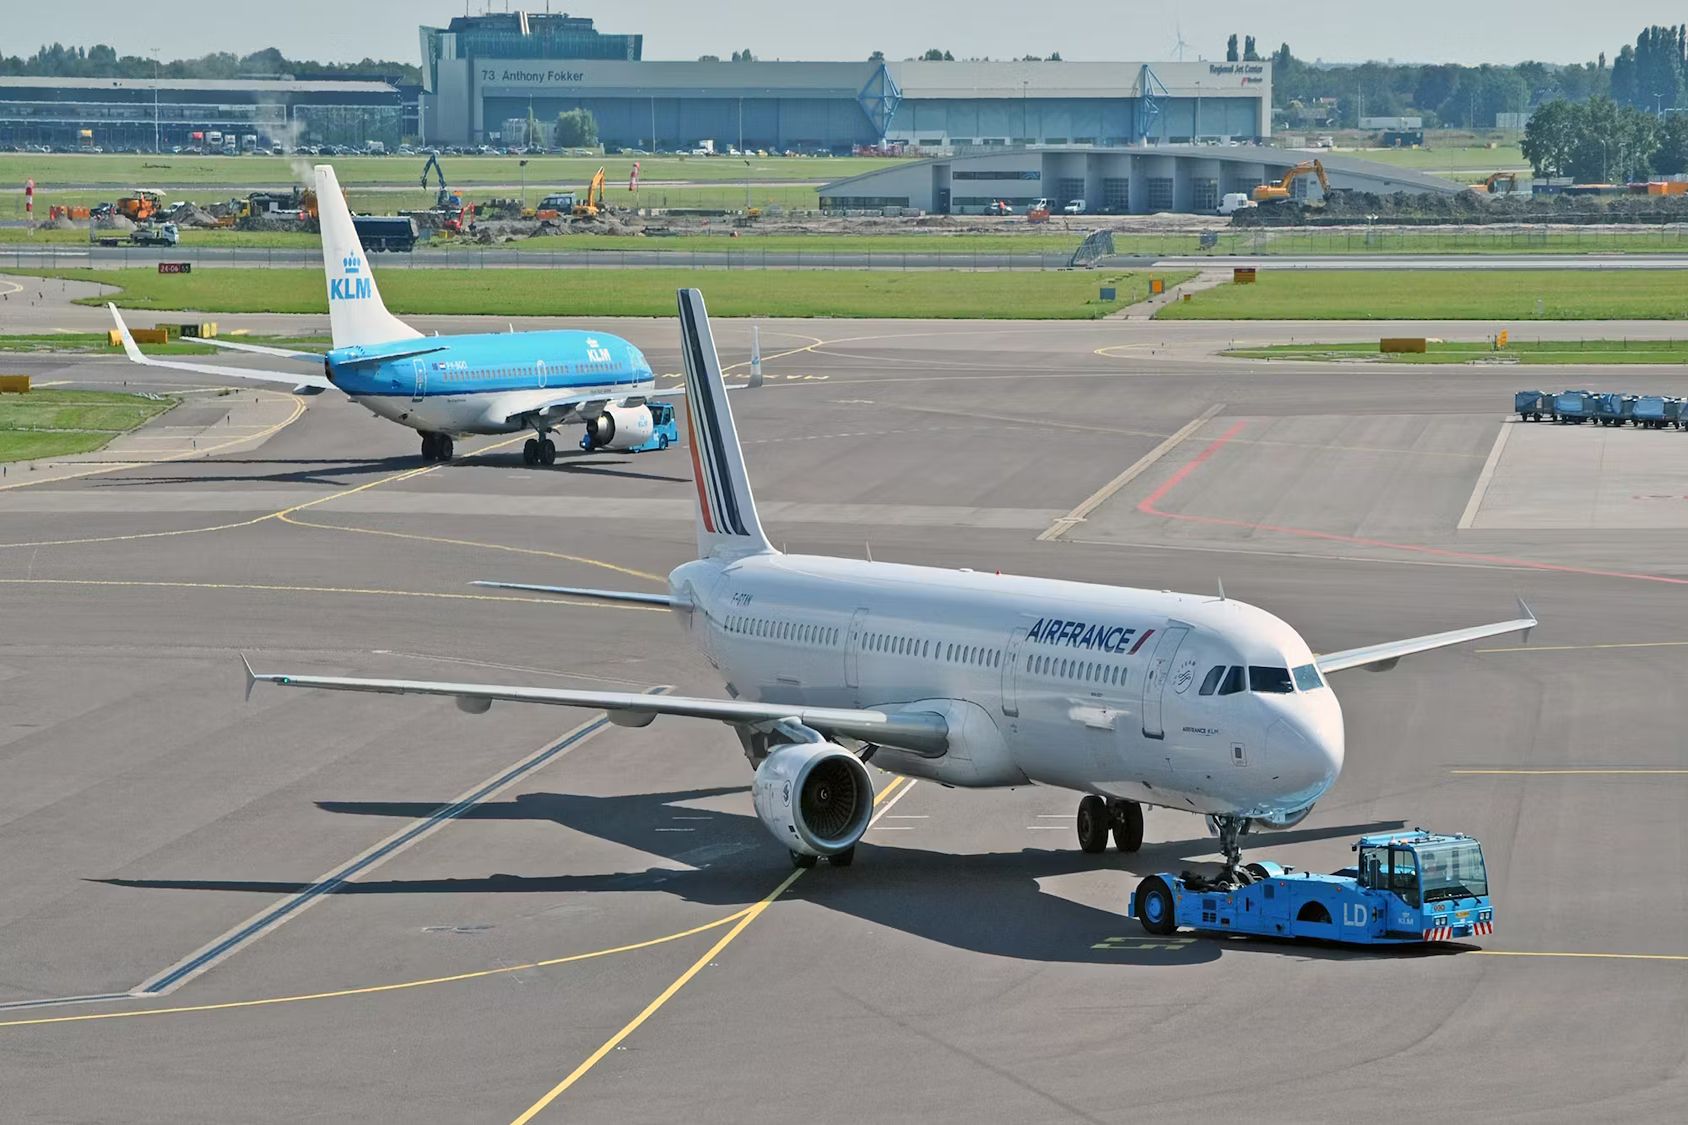 KLM and Air France aircraft being pushed back on the apron at Amsterdam Schiphol Airport.